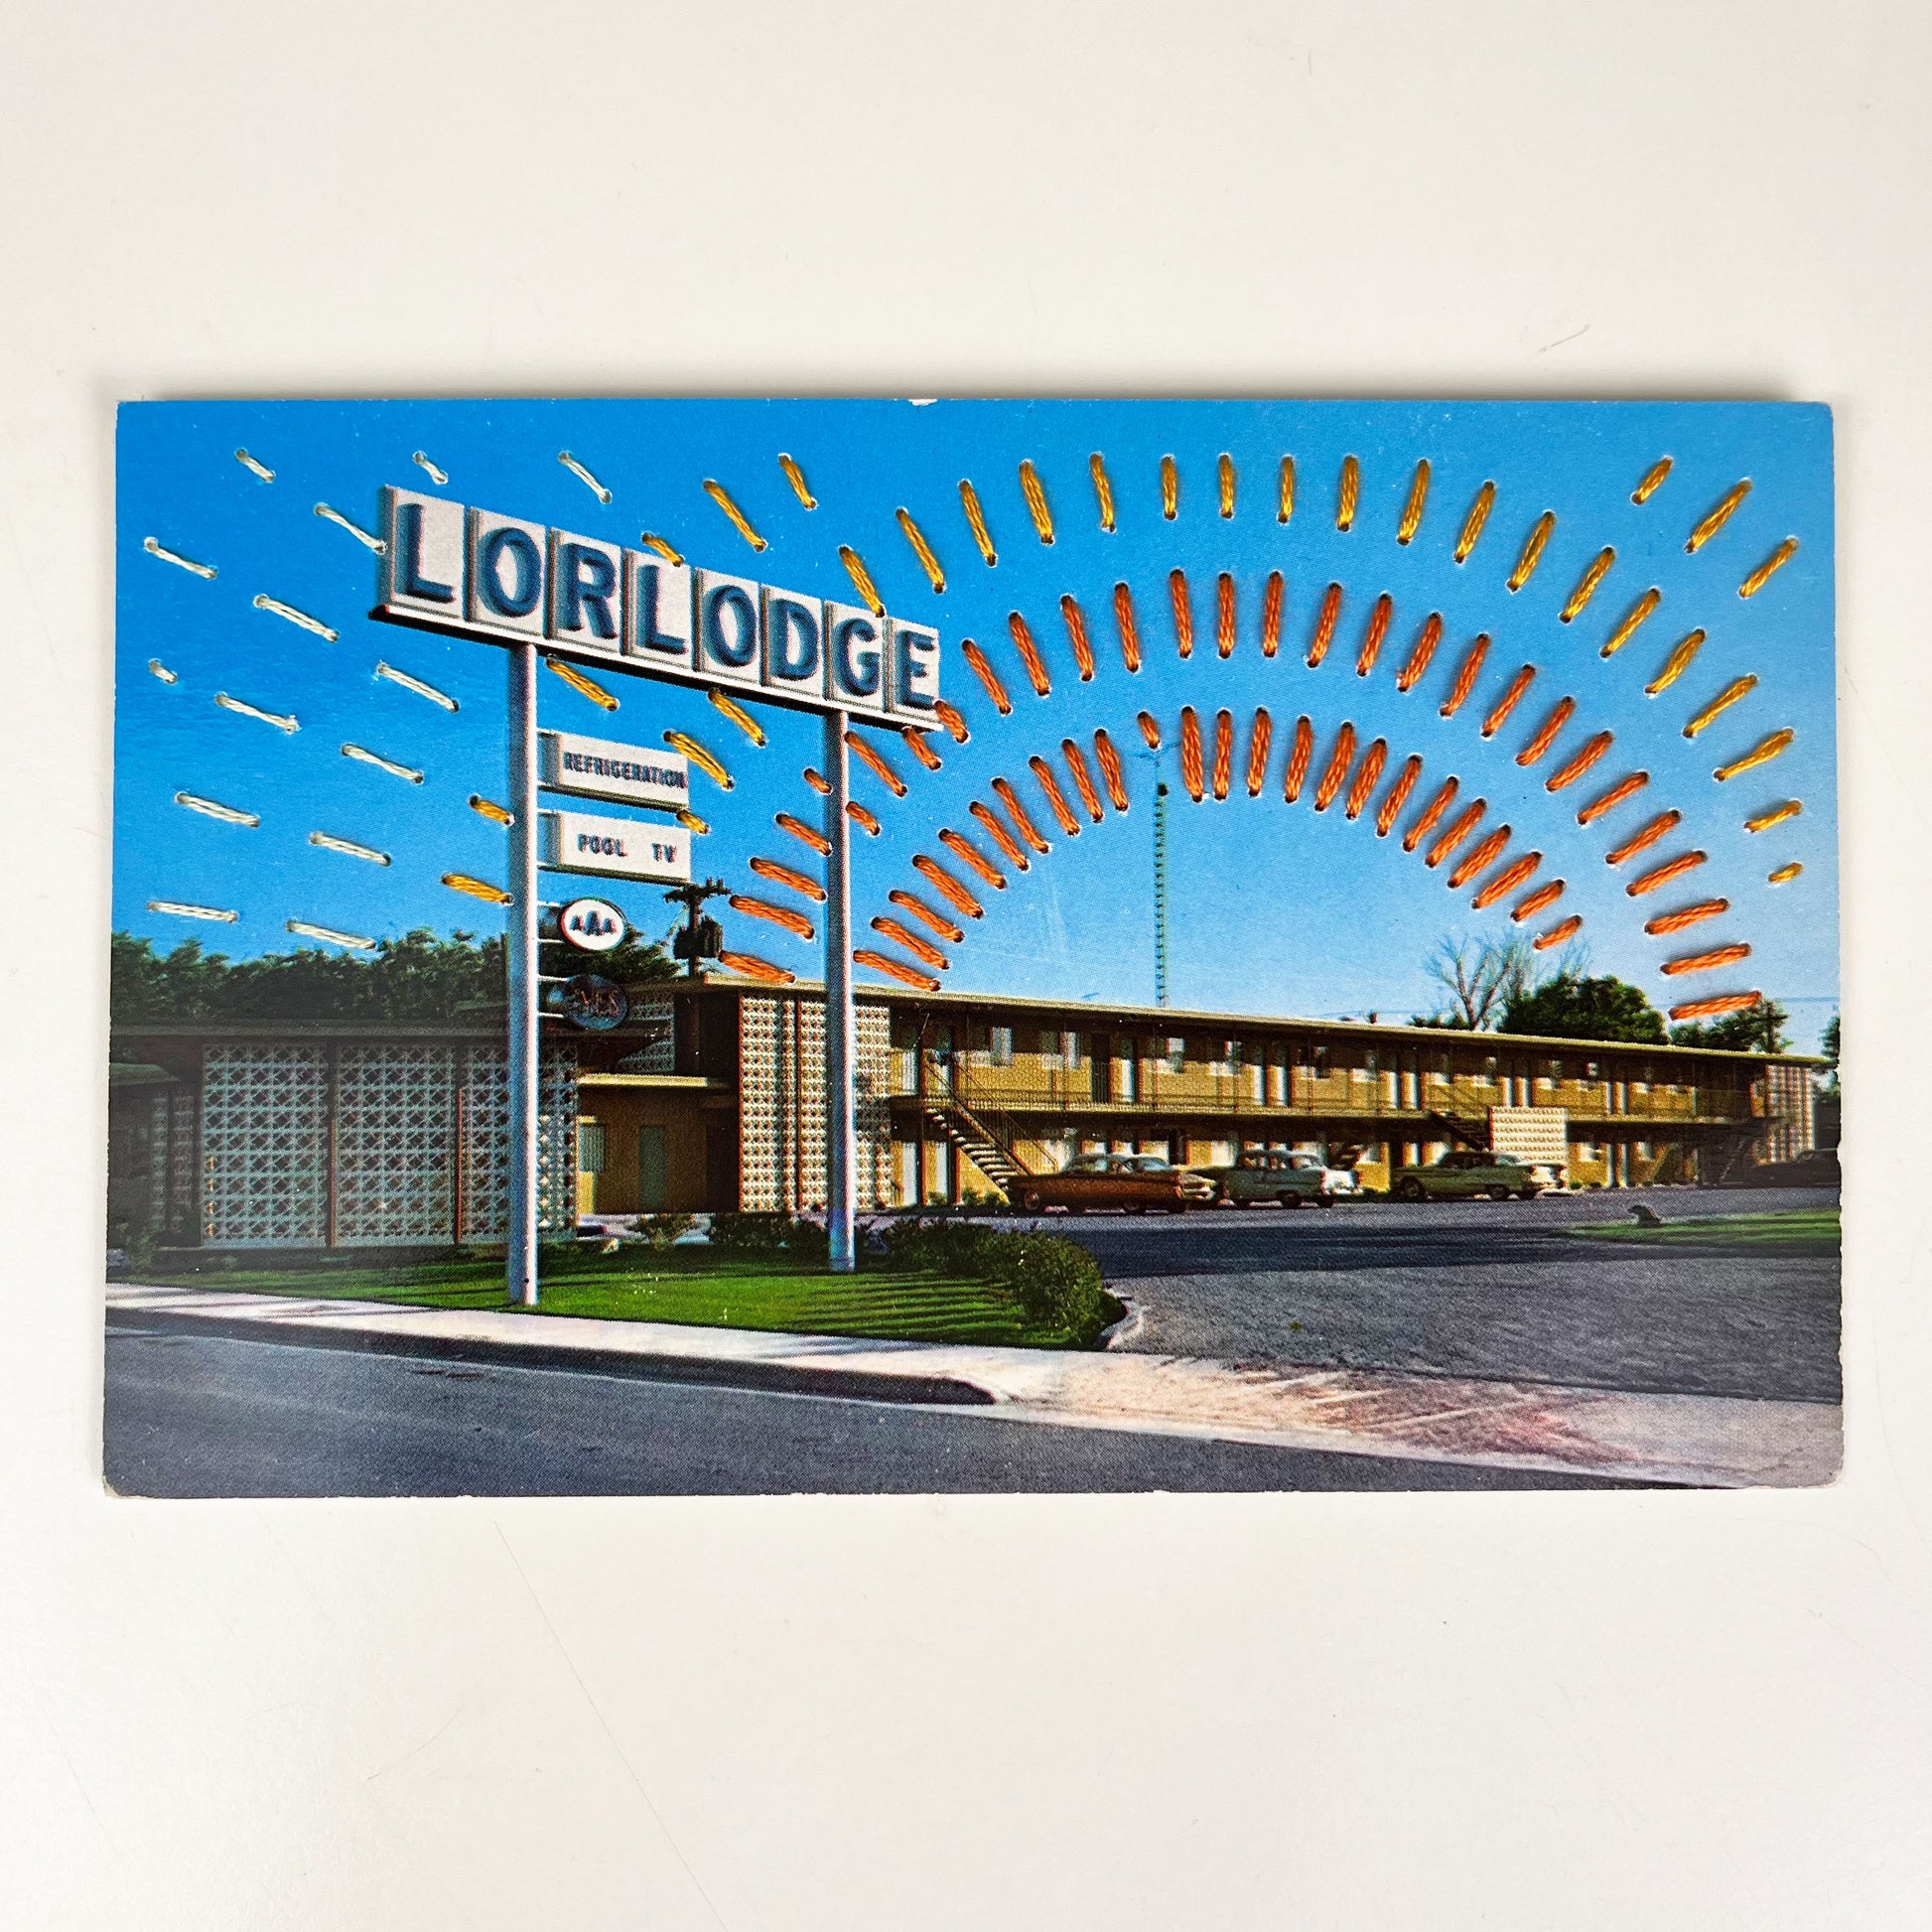 an old postcard of a motel called Lorlodge, with hand embroidered dashed lined resembling sun beams in oranges and yellows, stitched in the background on the sky only, the postcard is sitting on a white background